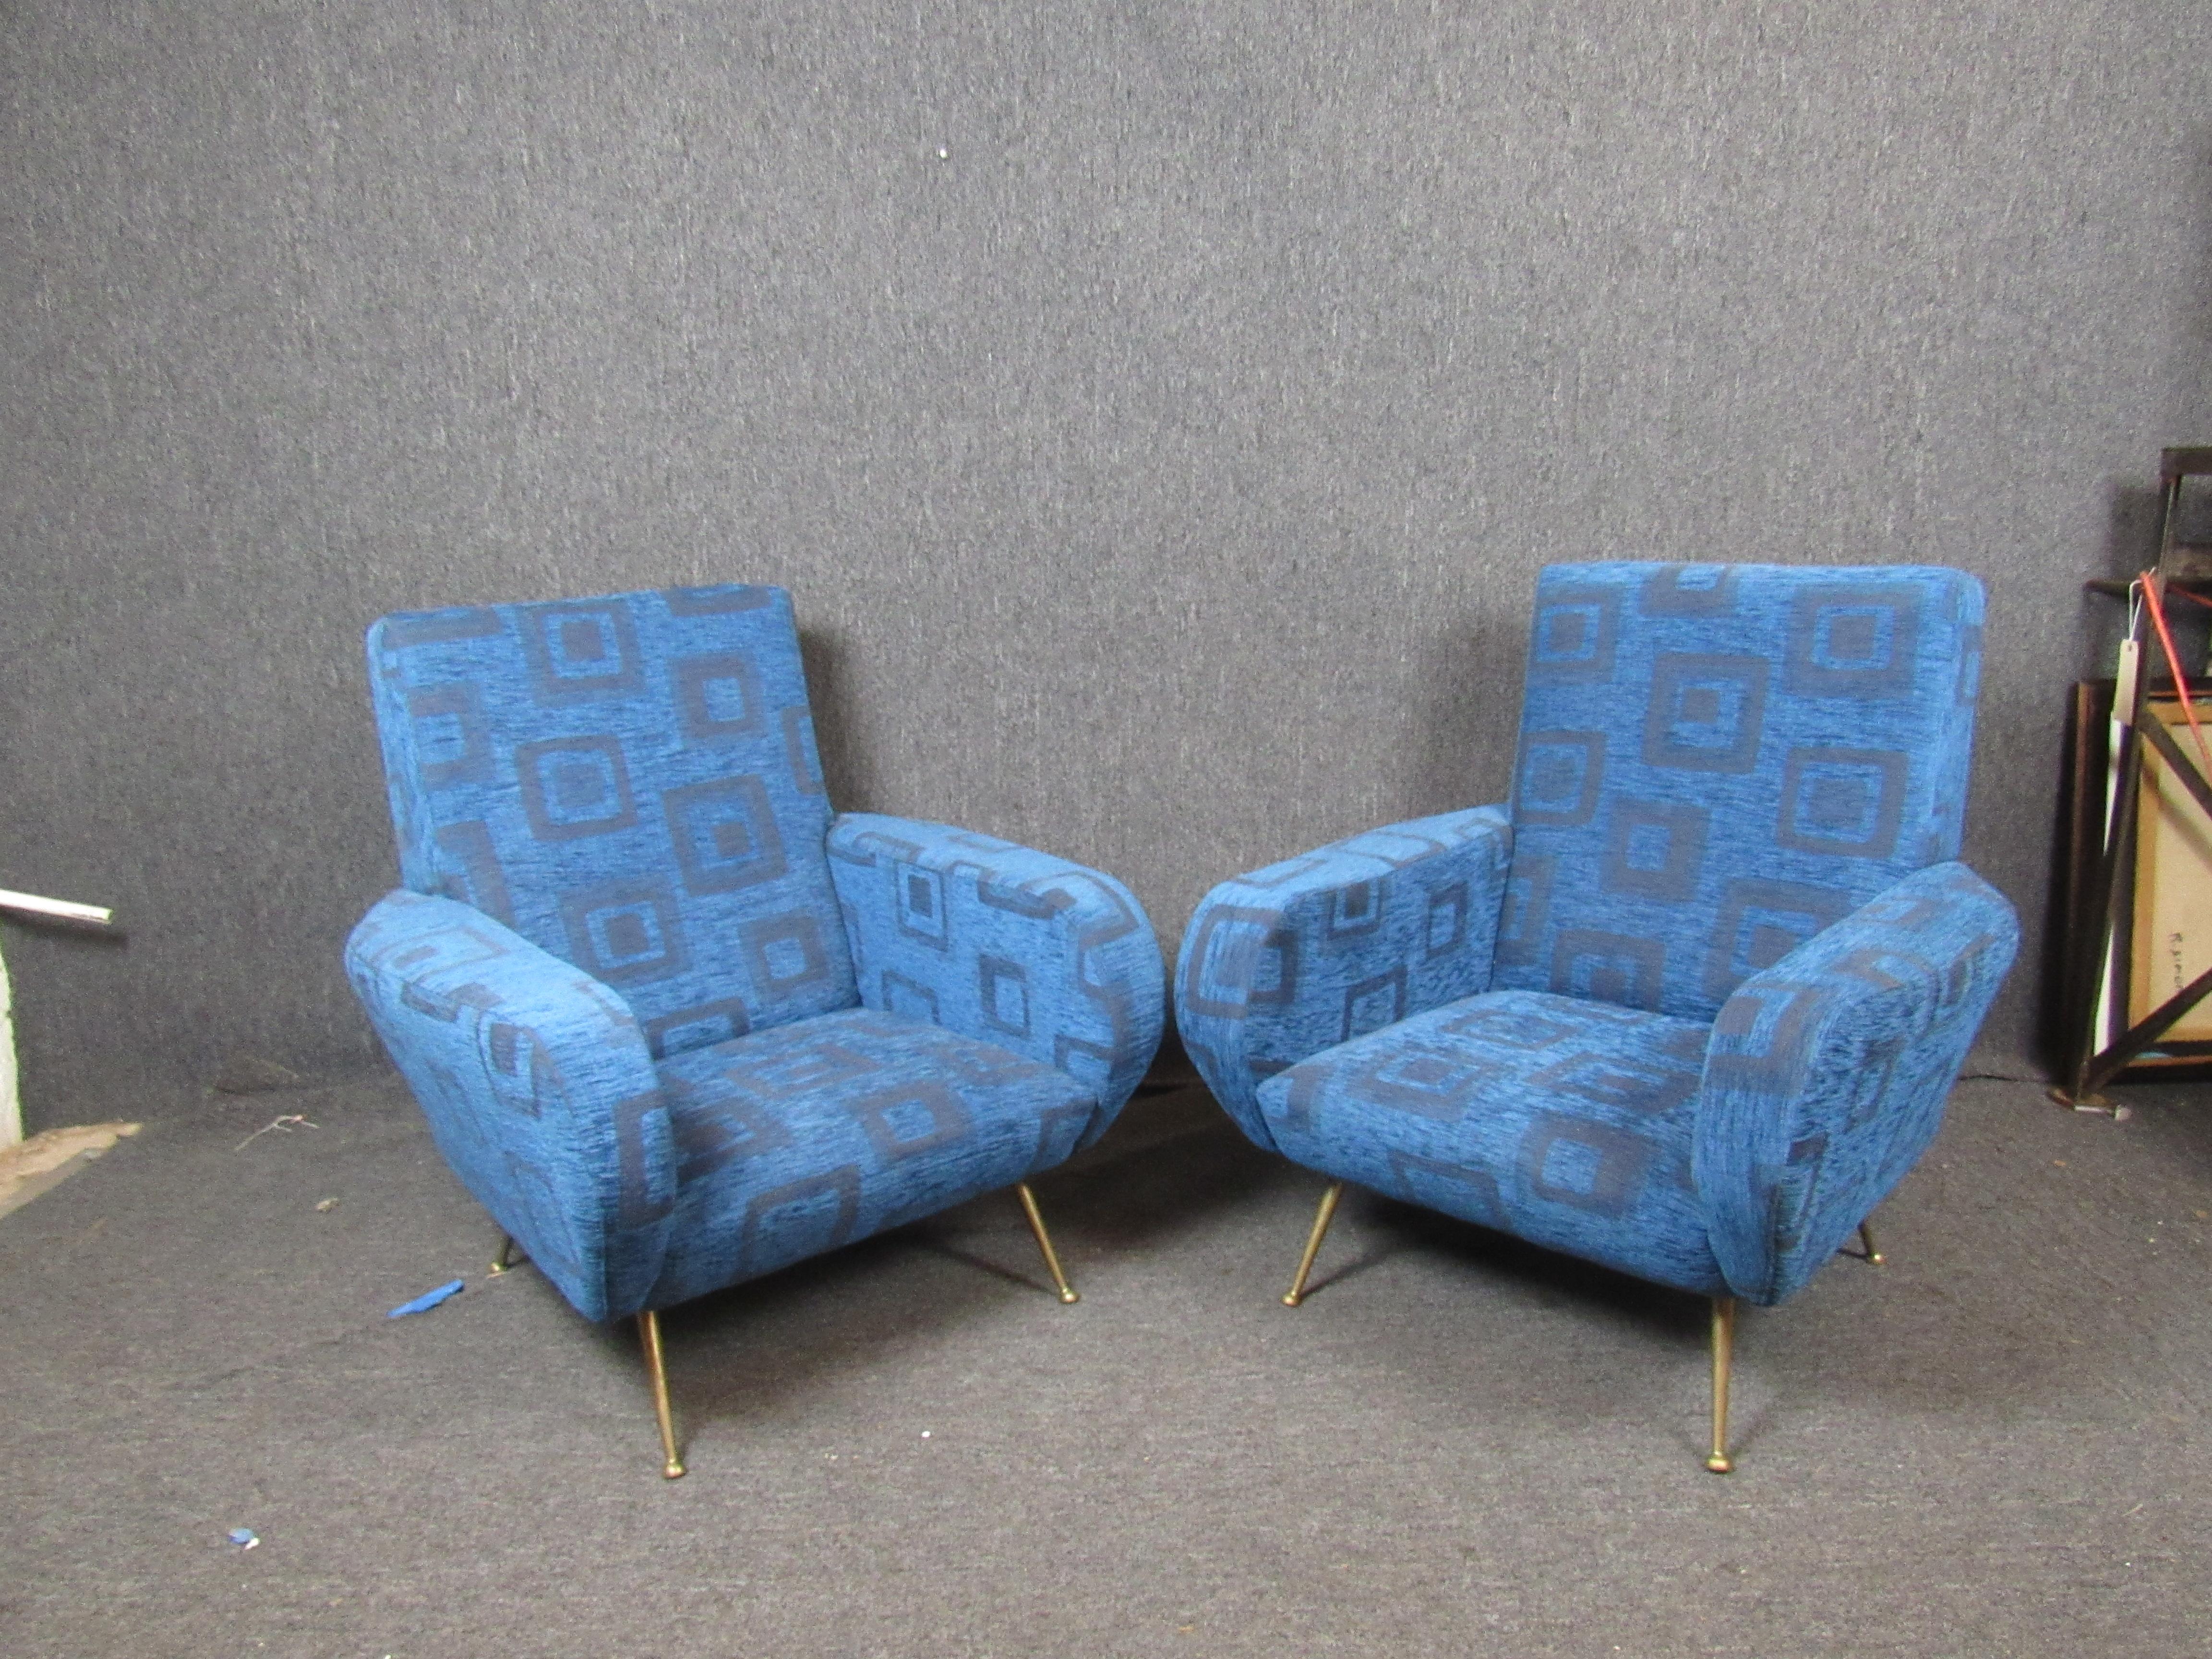 Absolutely stunning pair of vintage Italian mod lounge chairs. Featuring the funky, geometric upholstery with genuine brass accents. A large, plush seat with ample back support is sure to make these chairs as comfortable as they are attractive.